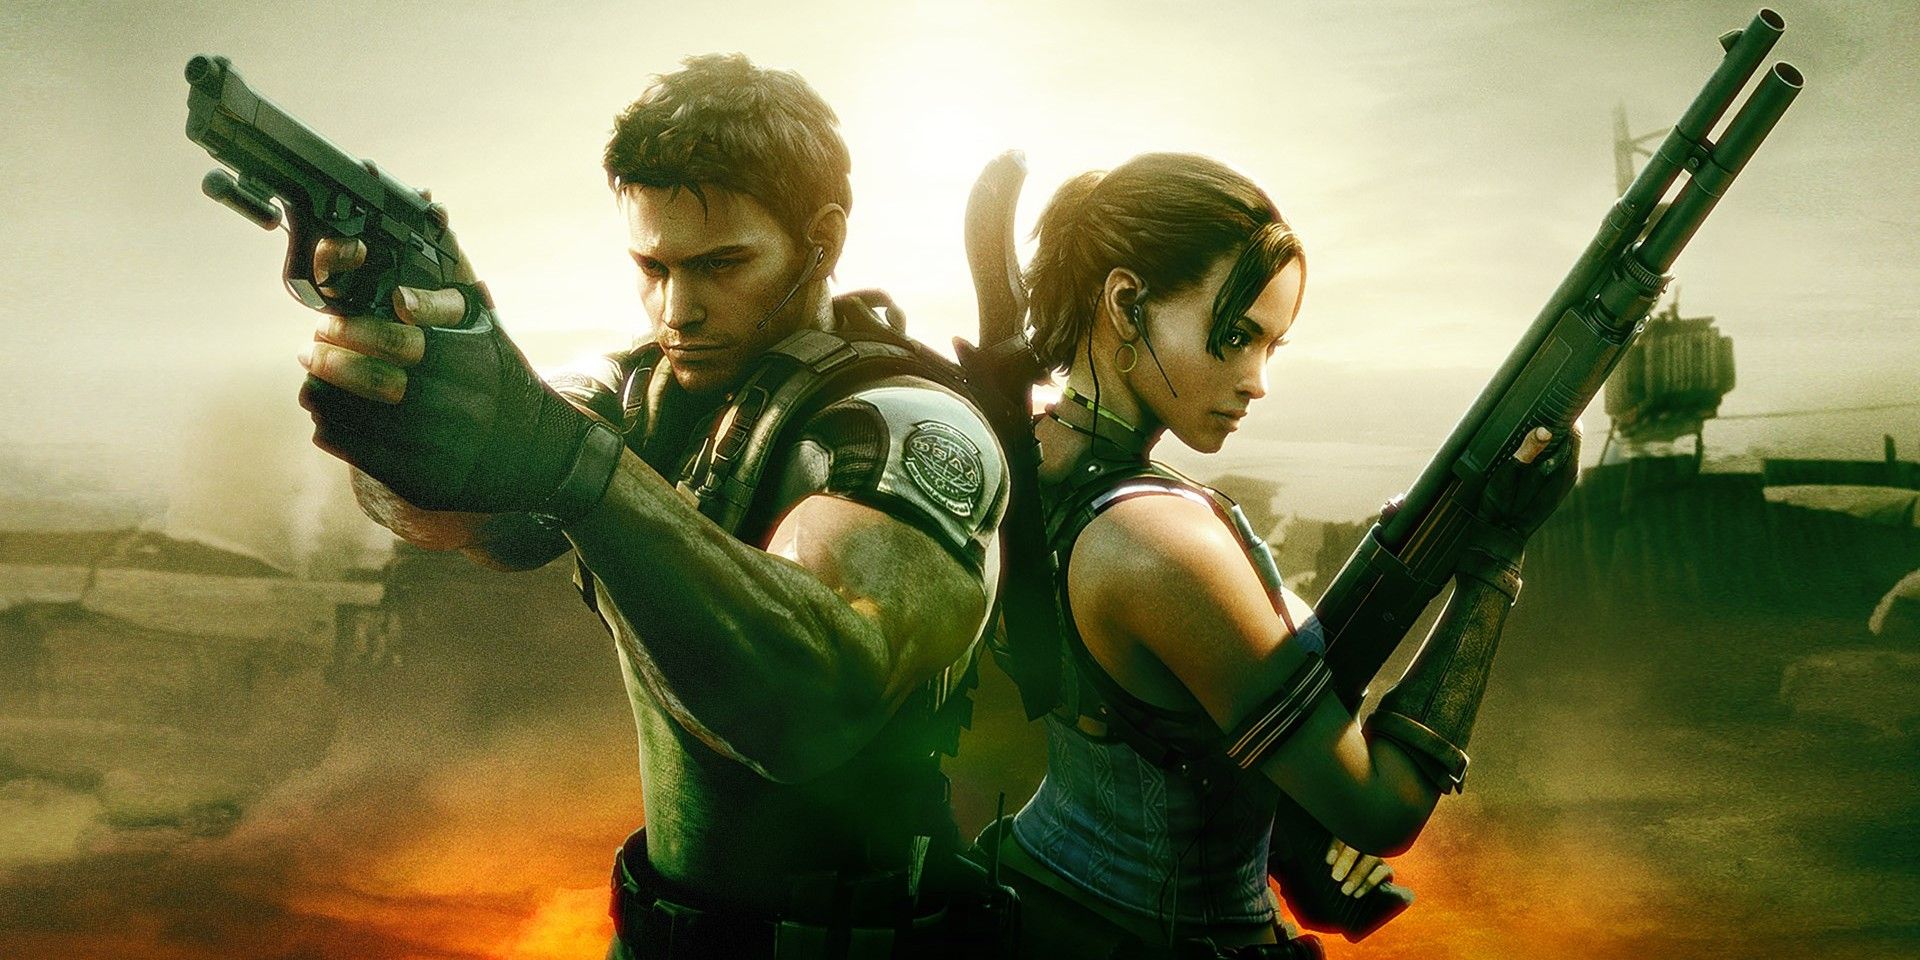 15 Best Video Games For Gamer Couples (According To Reddit)